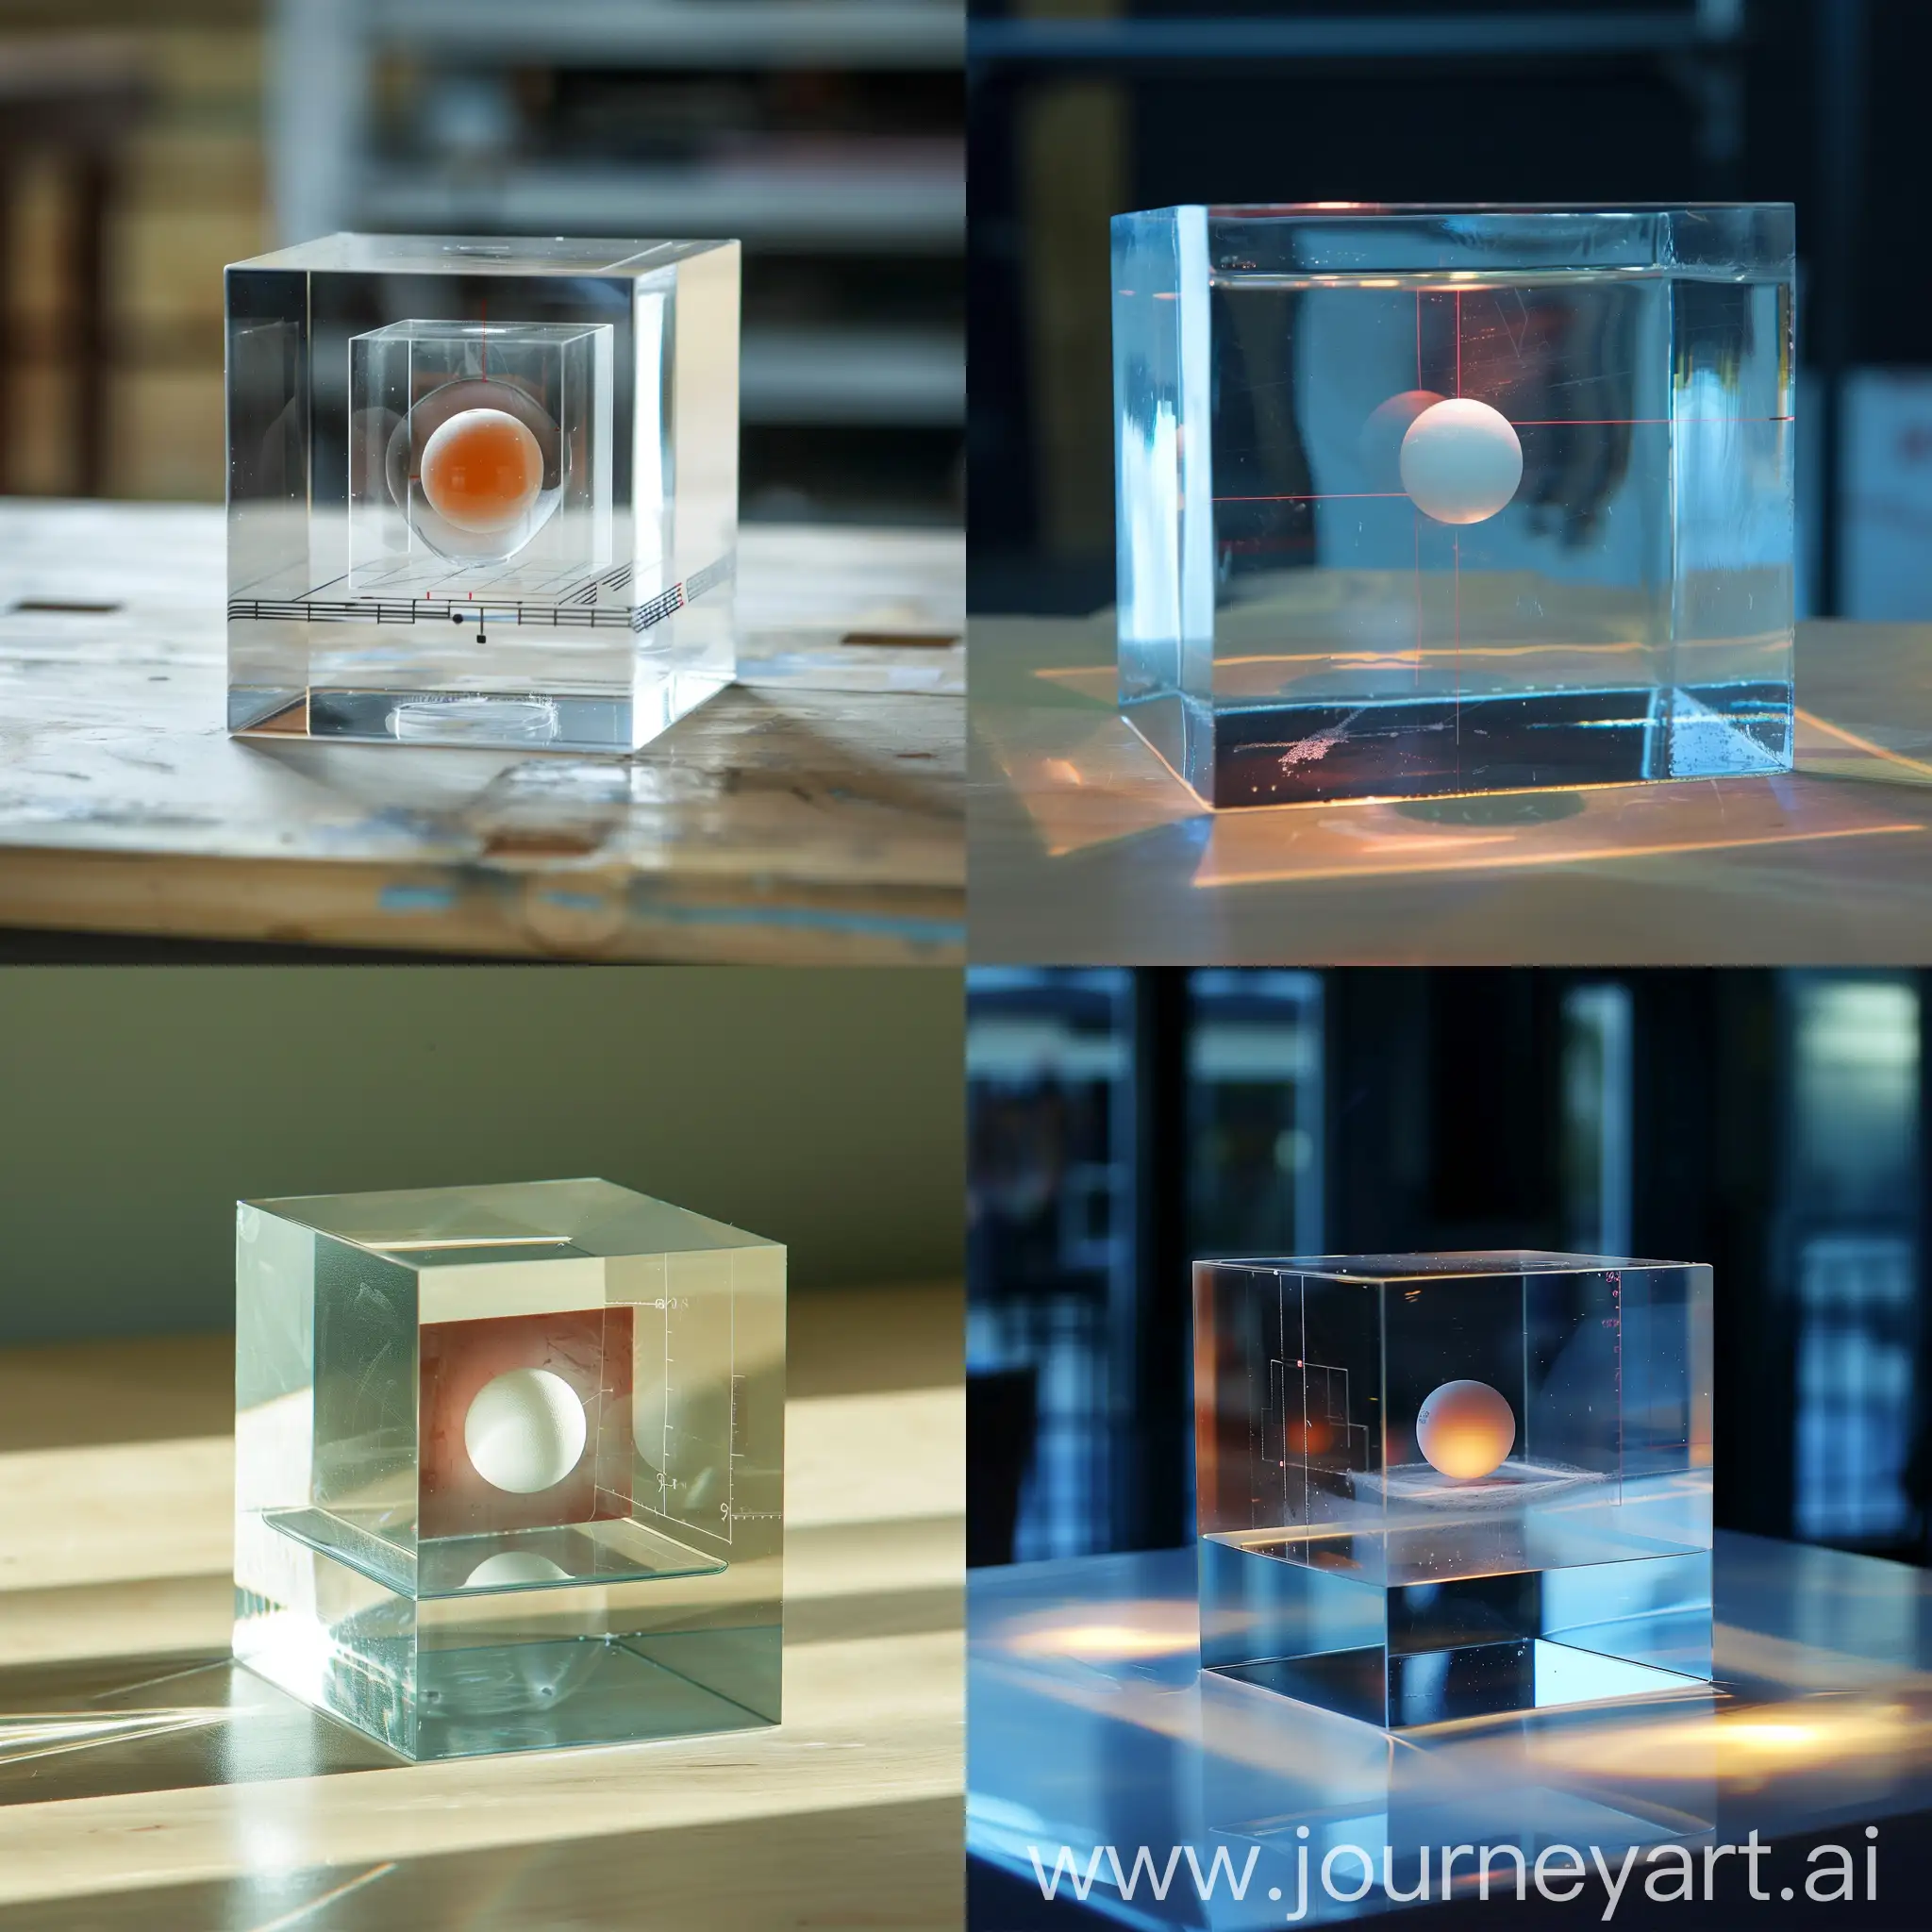 experiment with ping pong ball in a glass cube, where you are measuring x,y,z coordinates of ball inside the glass cube